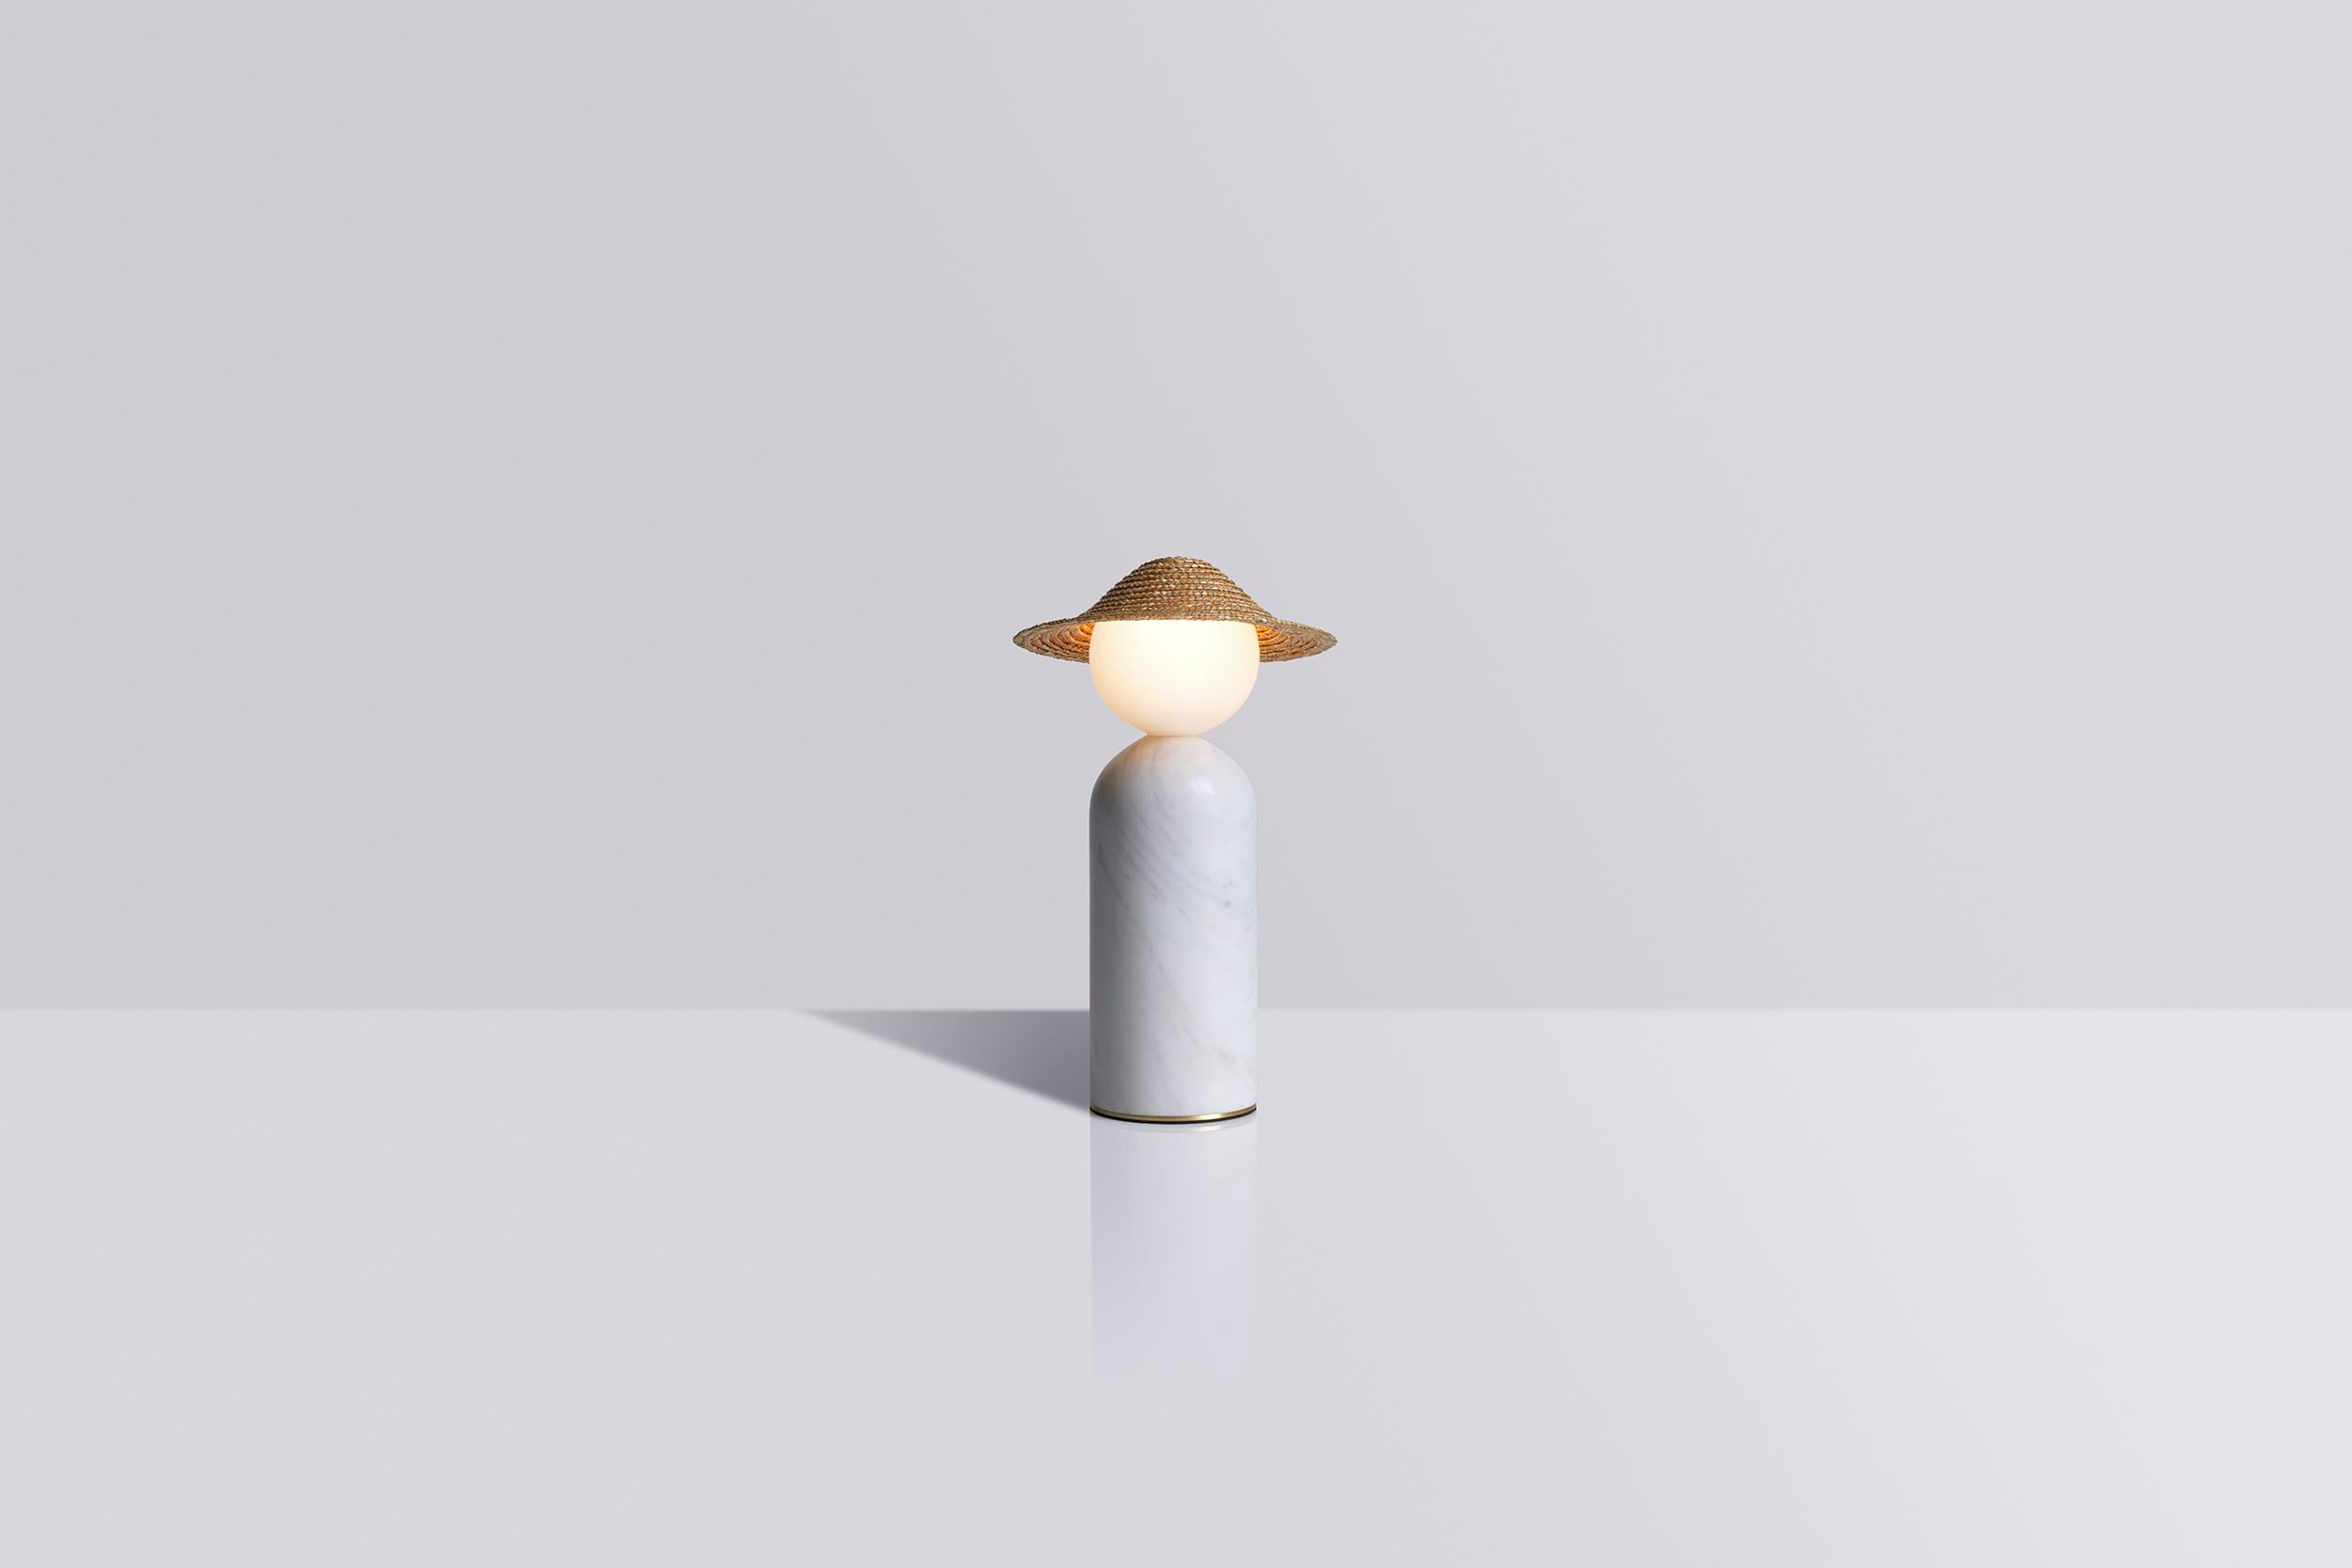 Théros 0.1 is a tabletop lamp — a poetic design gesture that combines a clean-cut, balanced form with a personal, heartfelt story. The lamps adorable figure evokes in all its simplicity the image of a child in the sun, narrating a timeless story of